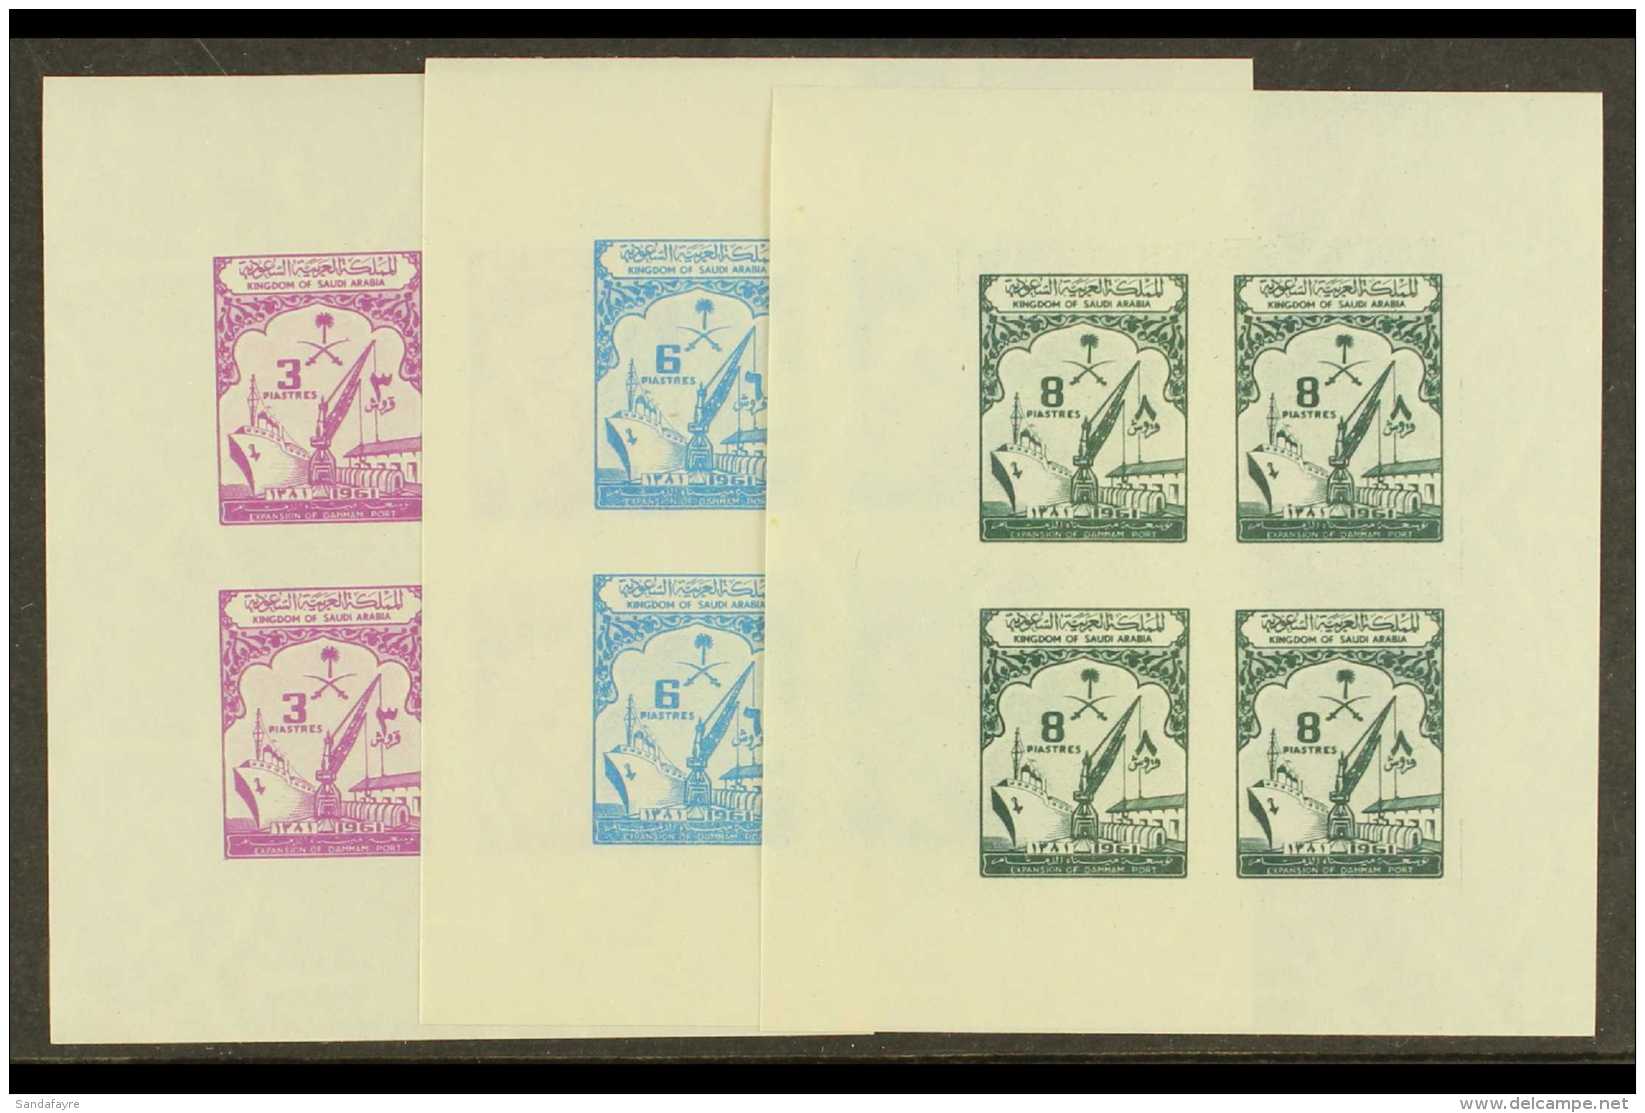 1961 PRESENTATION IMPERF MINIATURE SHEETS Dammam Port Extension Complete Set As Imperforate Miniature Sheets, As... - Arabie Saoudite